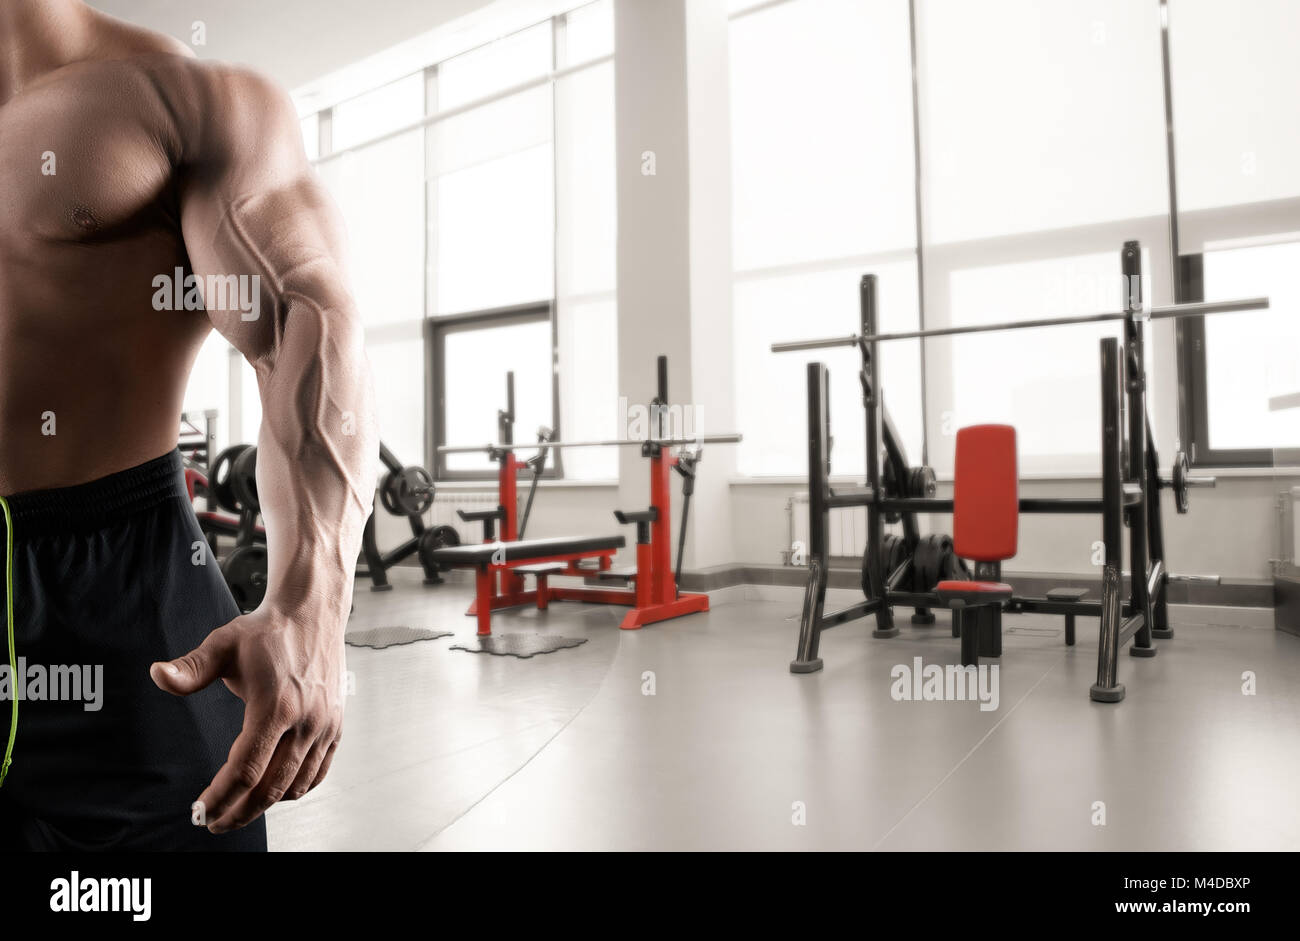 Abstract gym background Stock Photo